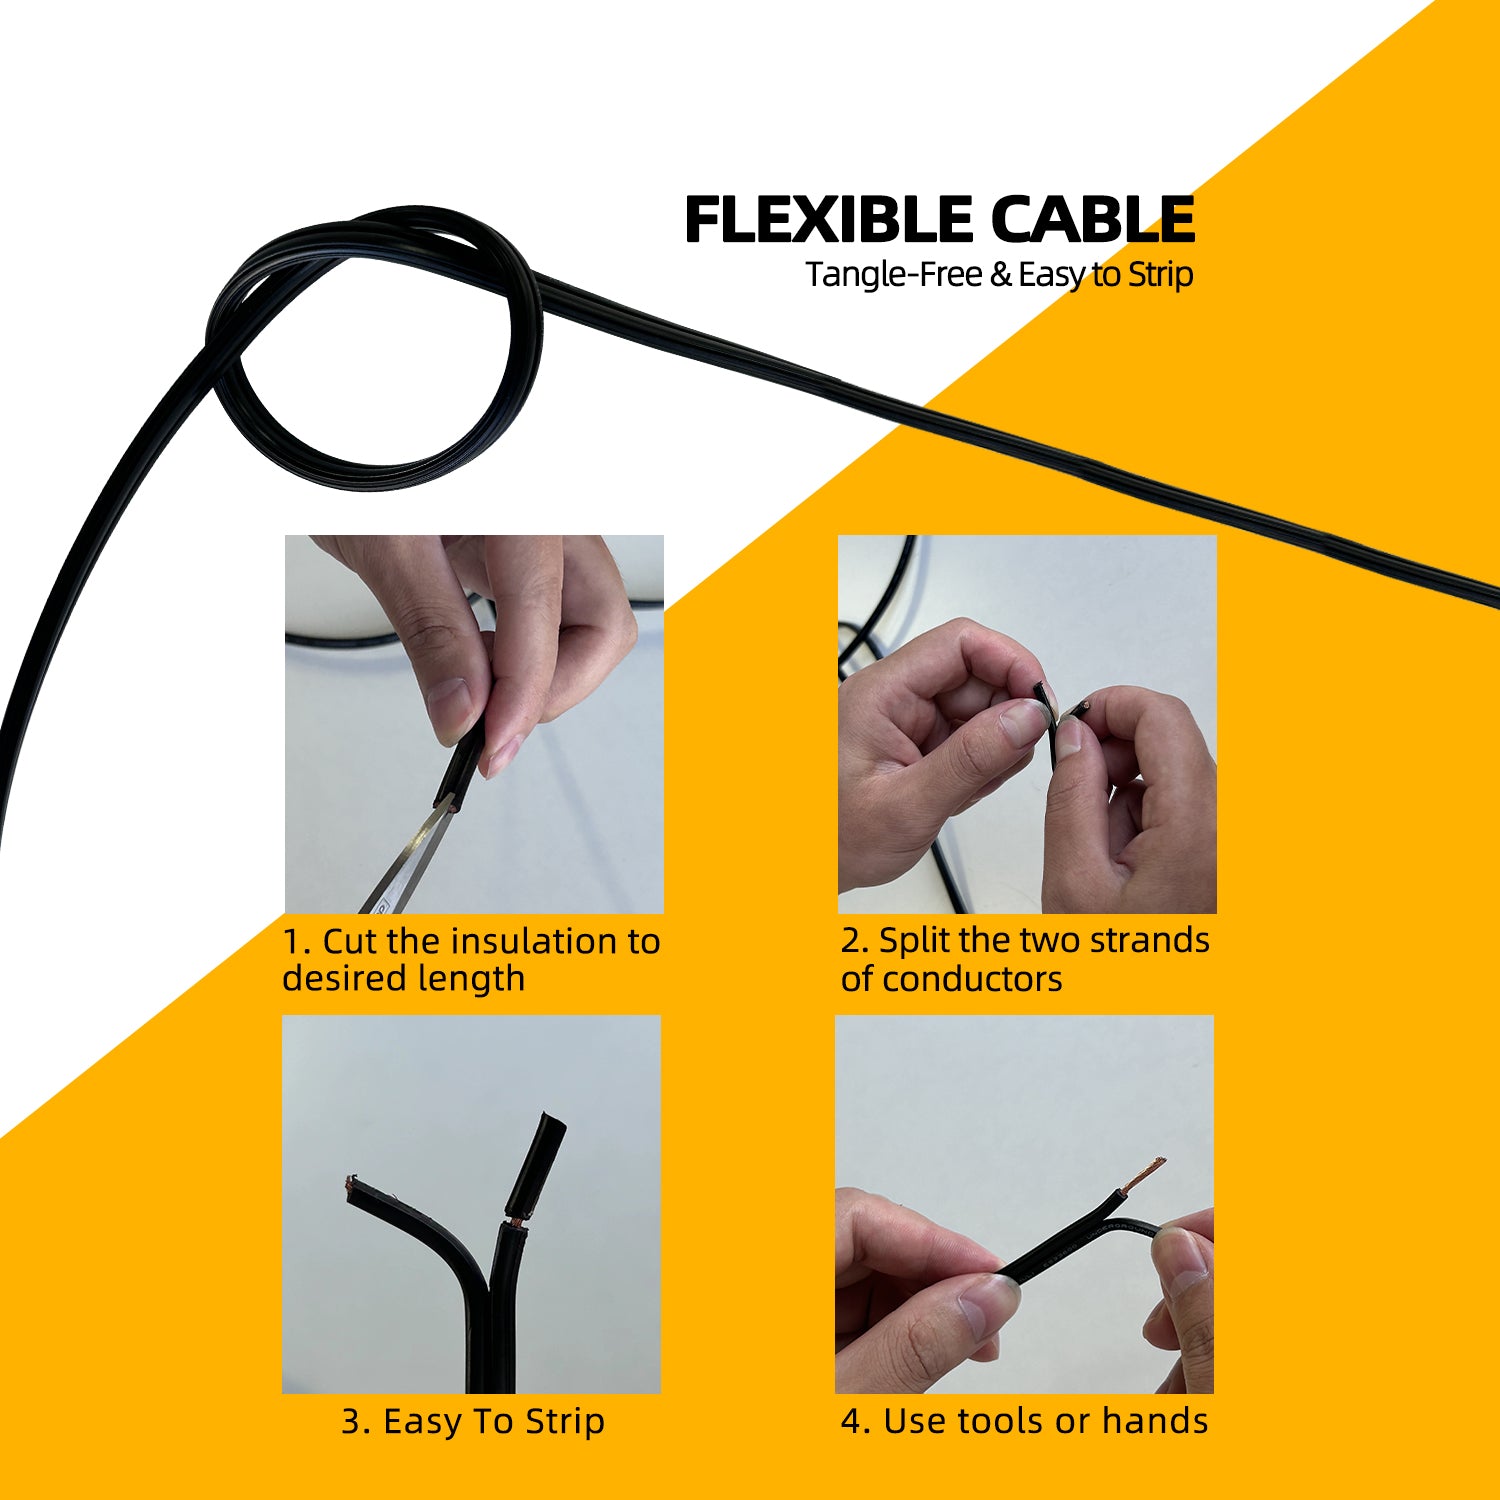 Instructional guide for handling 12 gauge low voltage landscape wire, showing steps to cut, split, and strip the cable using tools or hands. Flexible, tangle-free and easy to strip.